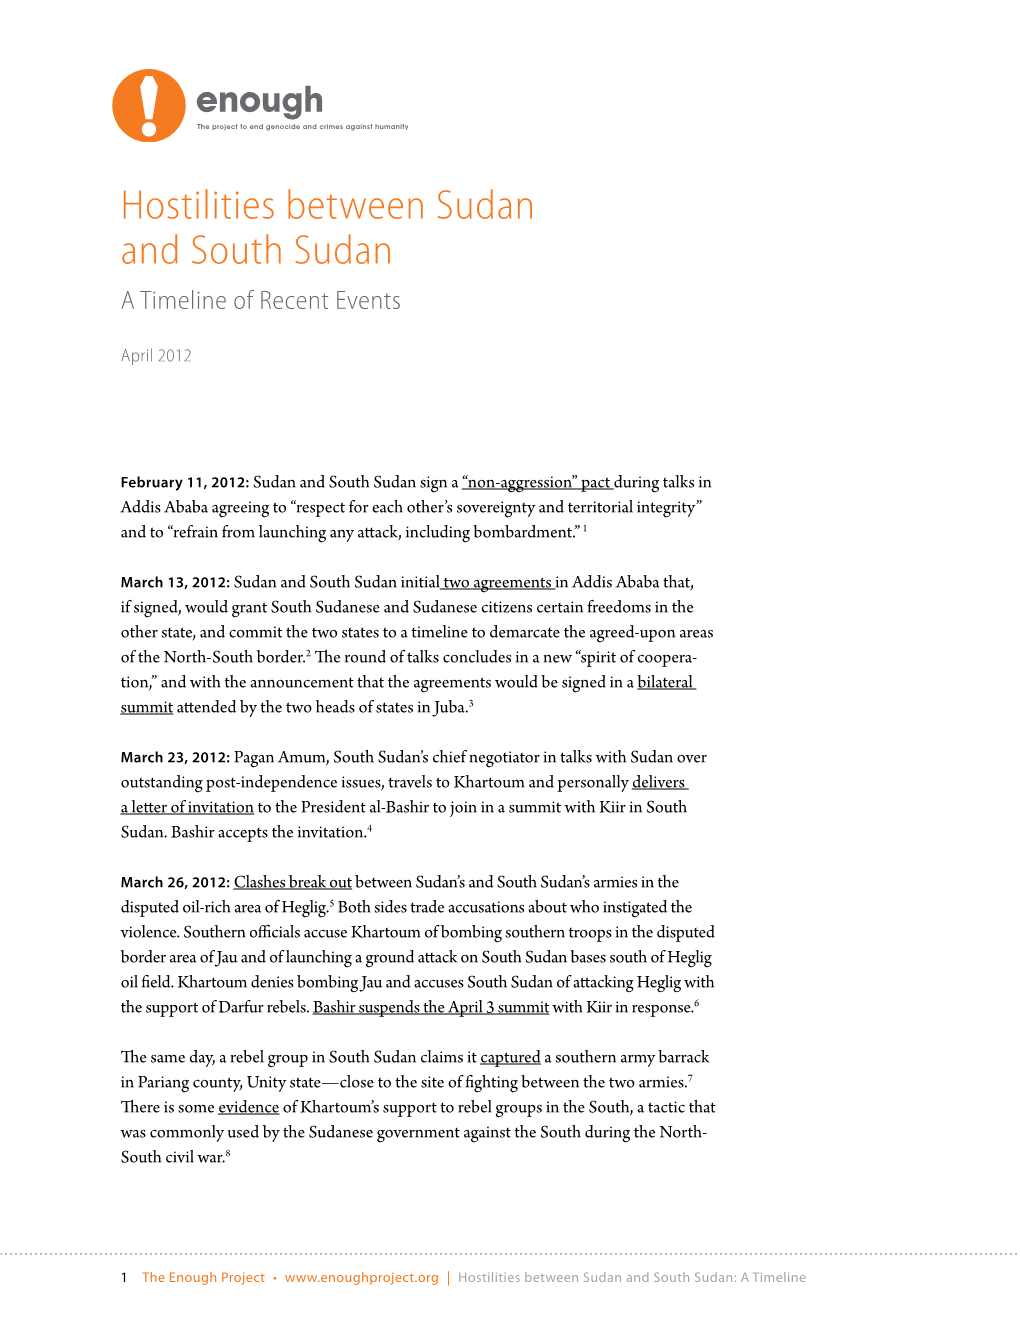 Hostilities Between Sudan and South Sudan a Timeline of Recent Events